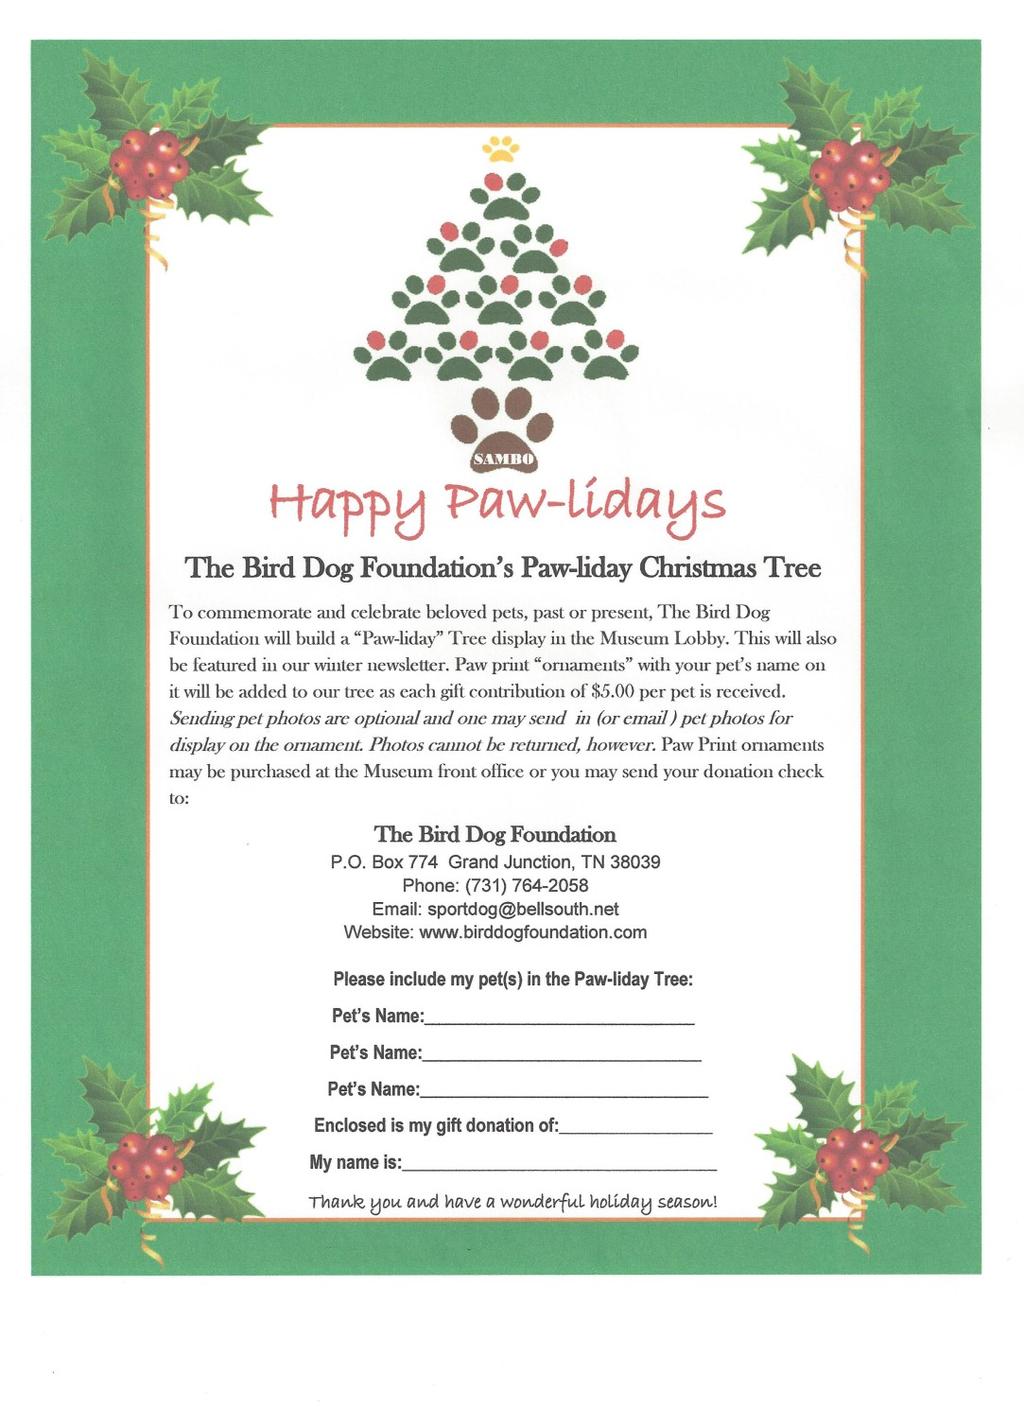 The National Bird Dog Museum s annual Pawliday fundraiser is happening now!